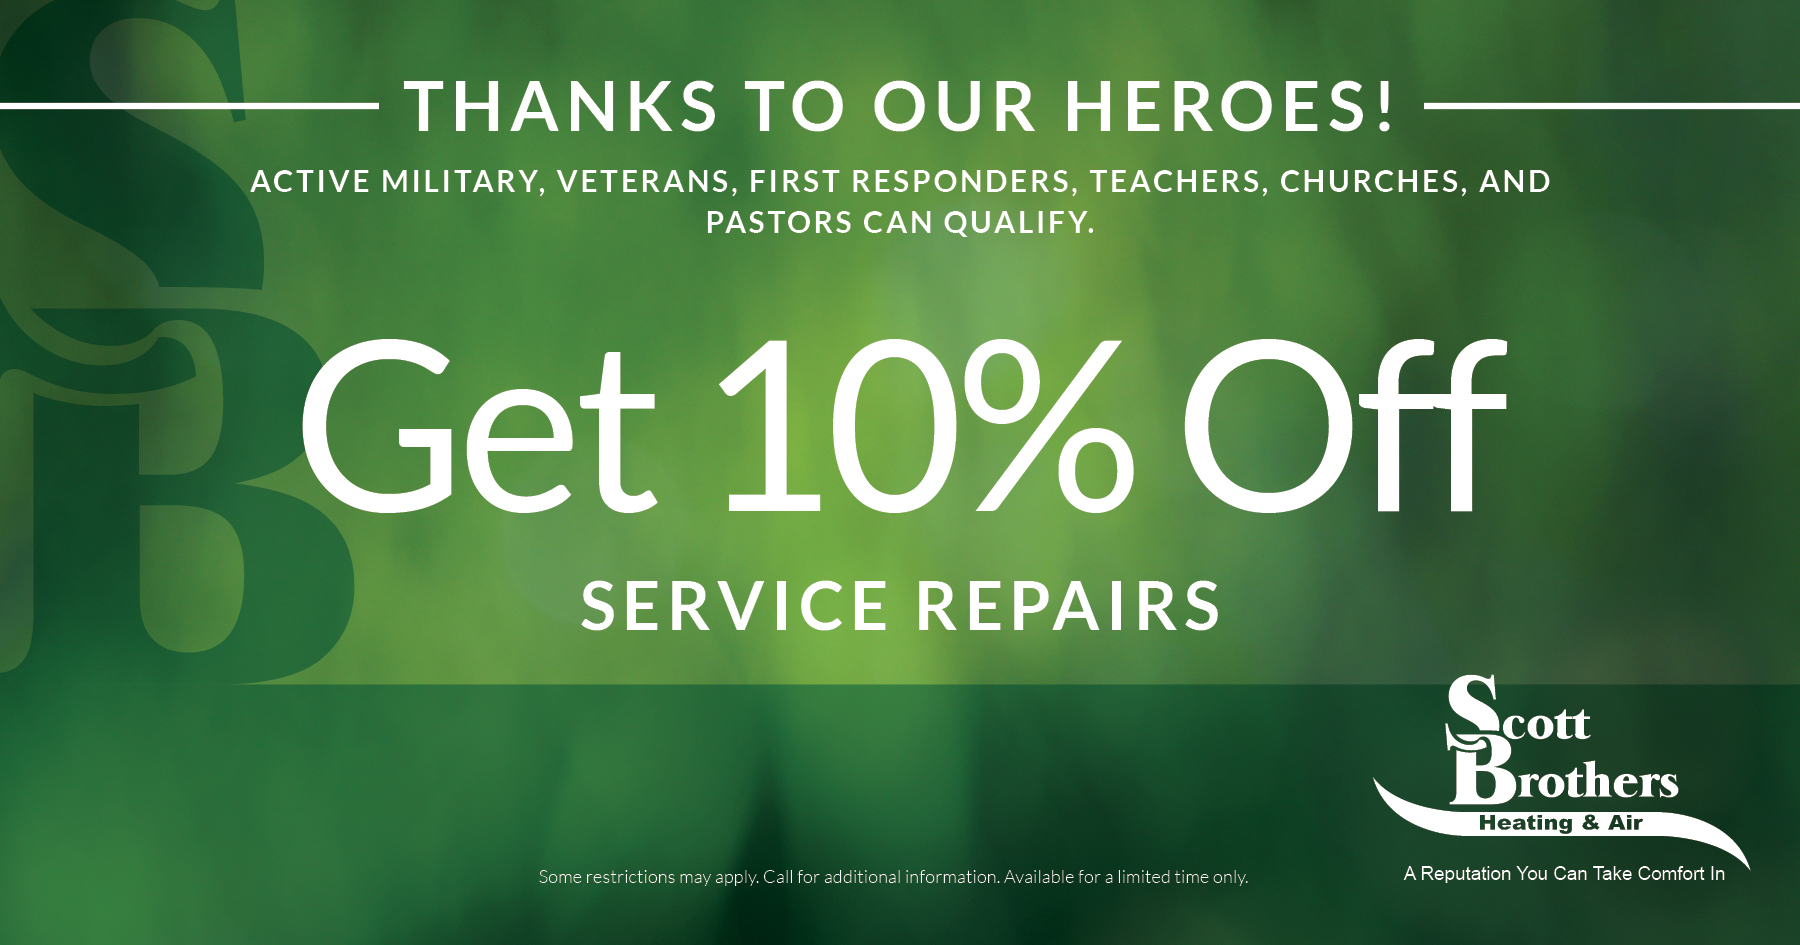 Thanks to our heroes! Active military and veterans, first responders, teachers, churches, and pastors can qualify. Get 10% off off service repairs. Some restrictions may apply. Call for additional information. Available for a limited only.